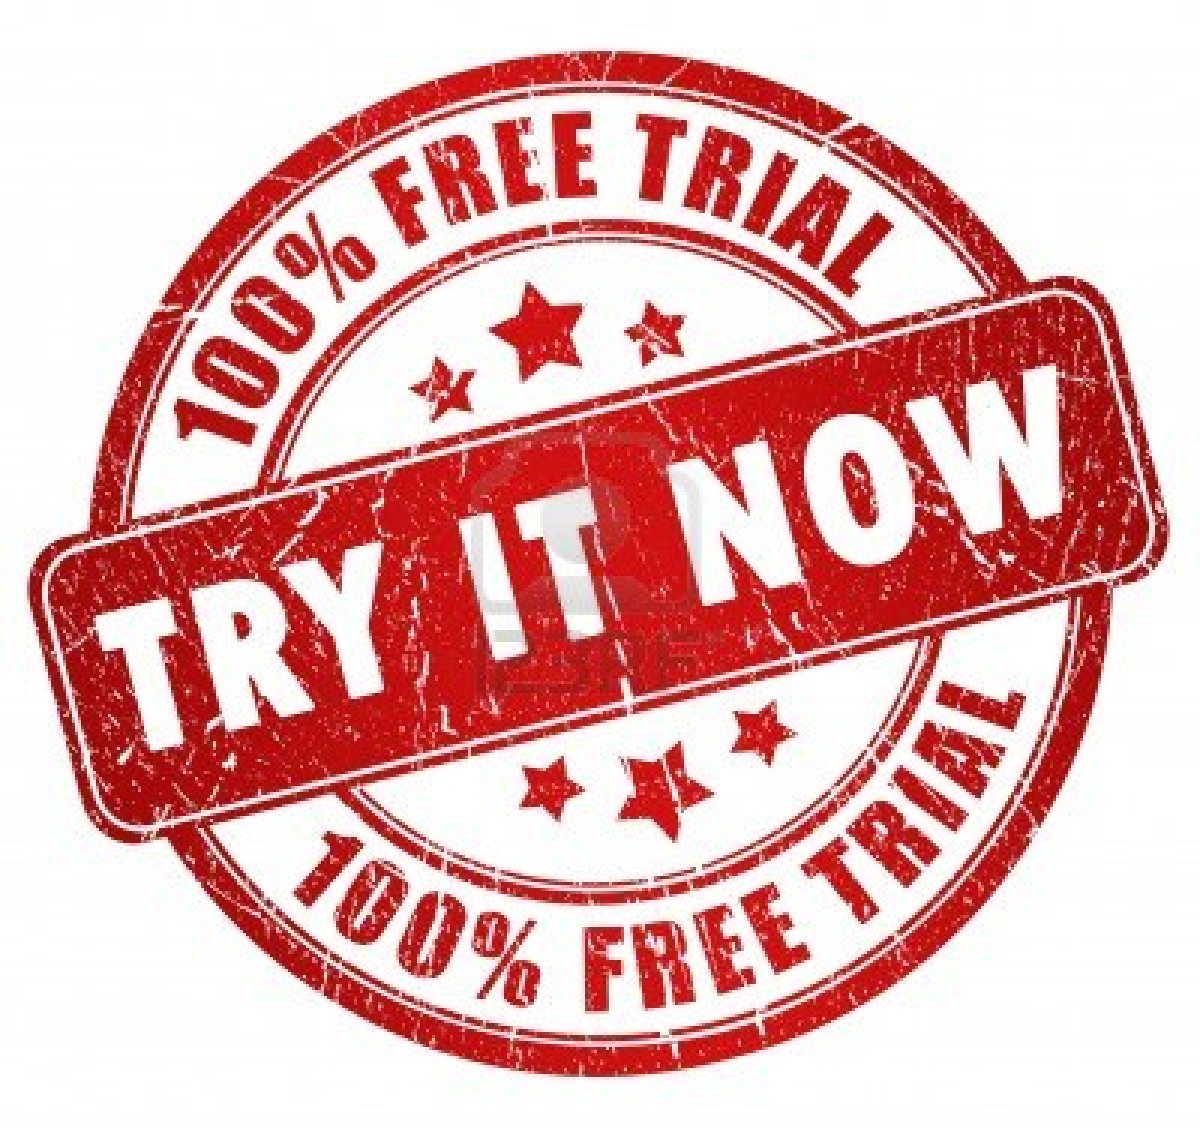 Online free trial offers